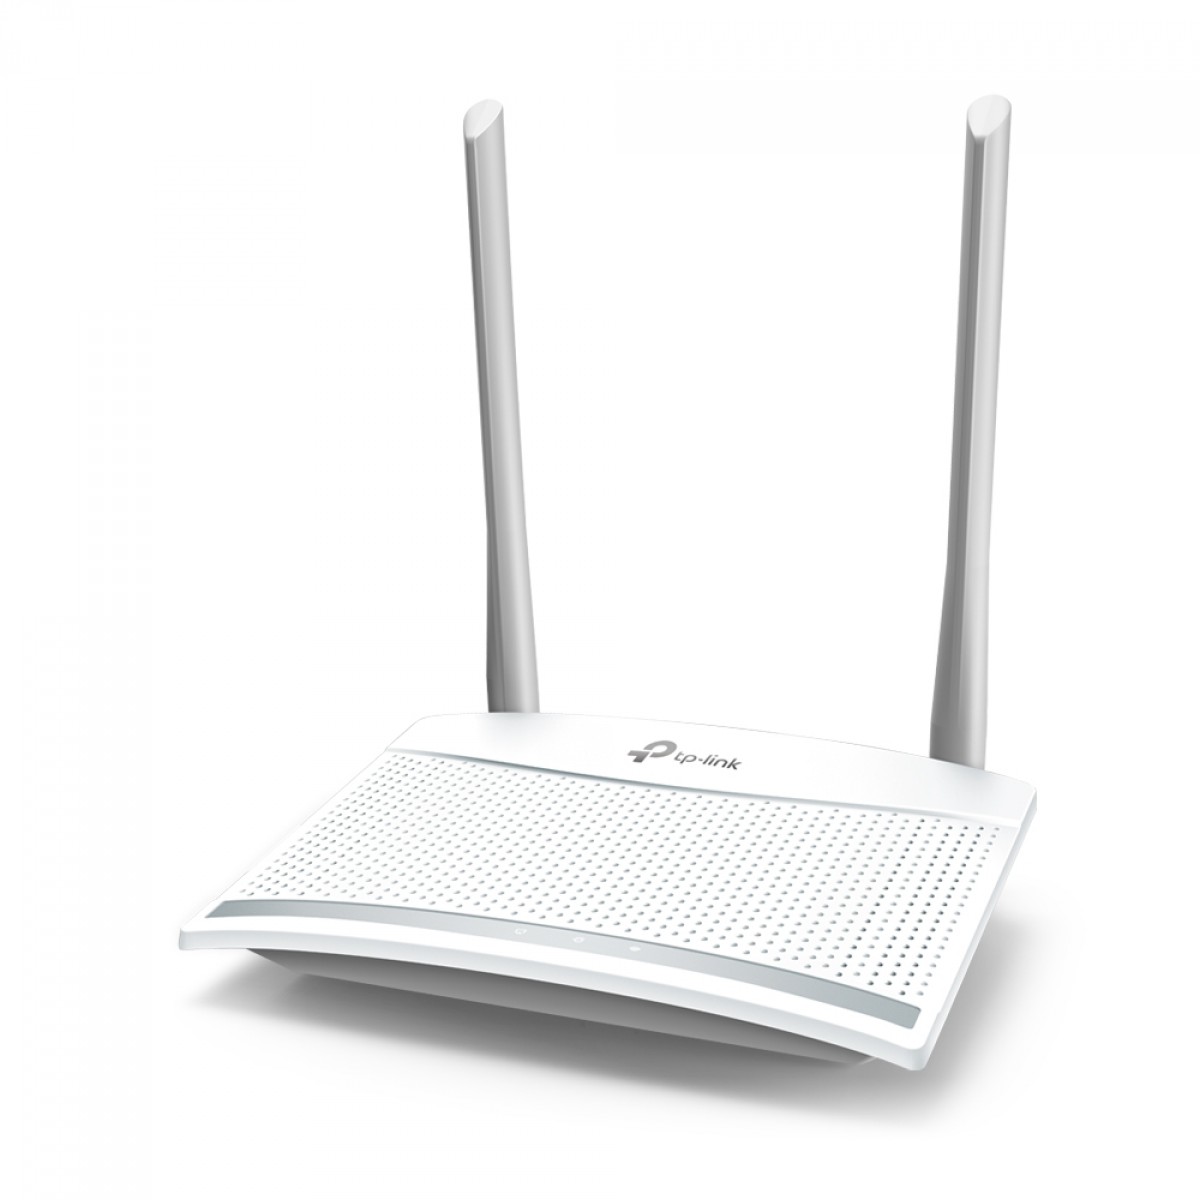 Roteador Wireless N TP-LINK, 300Mbps, TL-WR820N